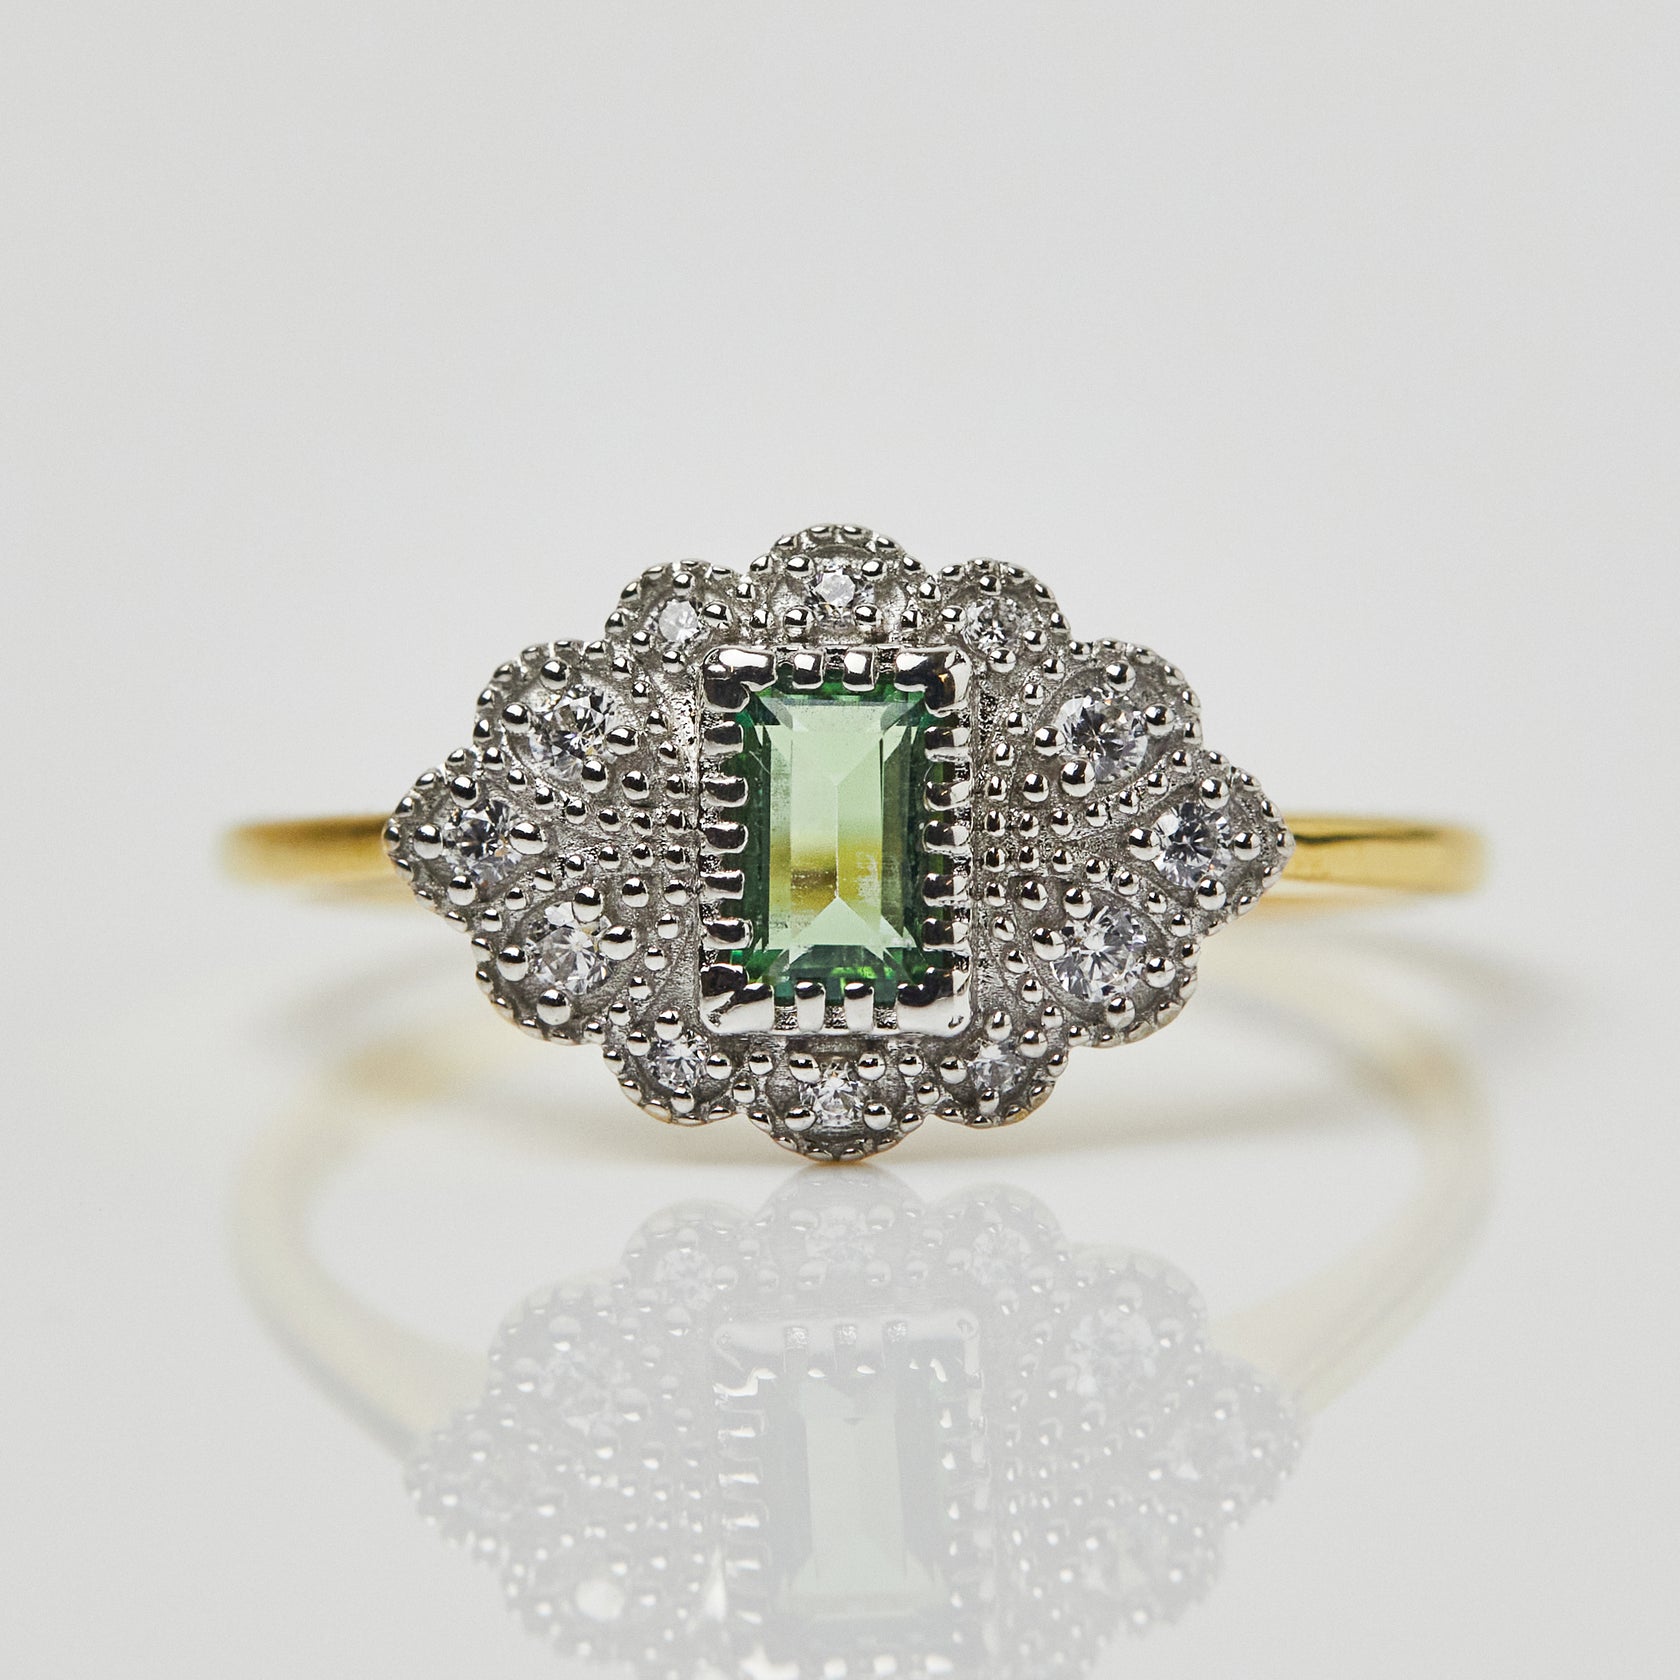 Fern Green Topaz Vintage Ring | Local Eclectic – local eclectic